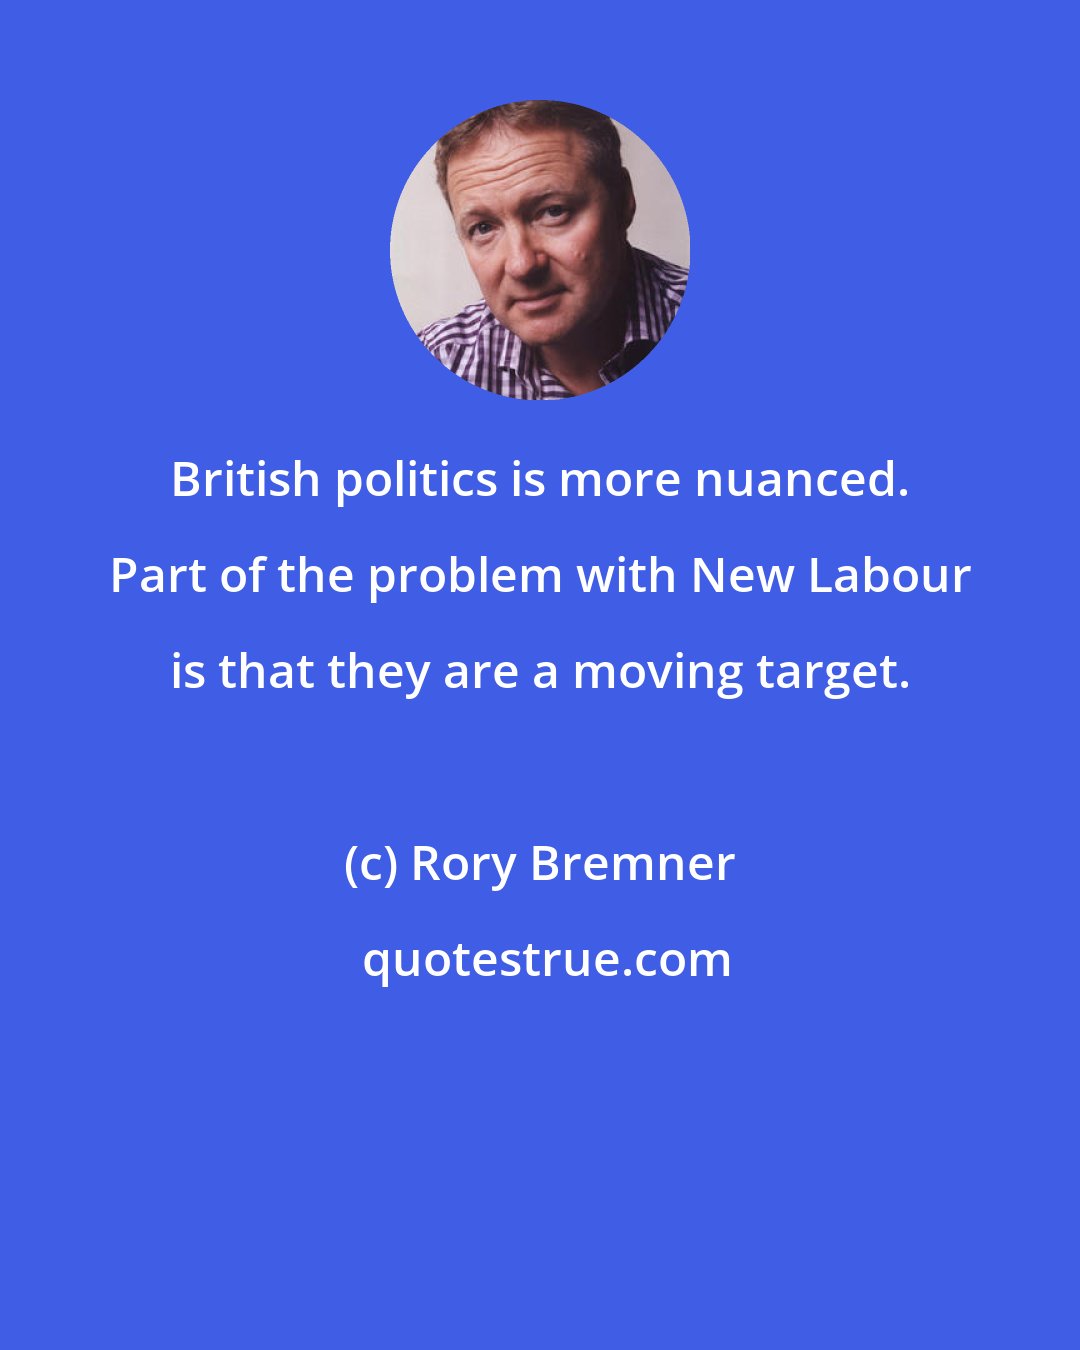 Rory Bremner: British politics is more nuanced. Part of the problem with New Labour is that they are a moving target.